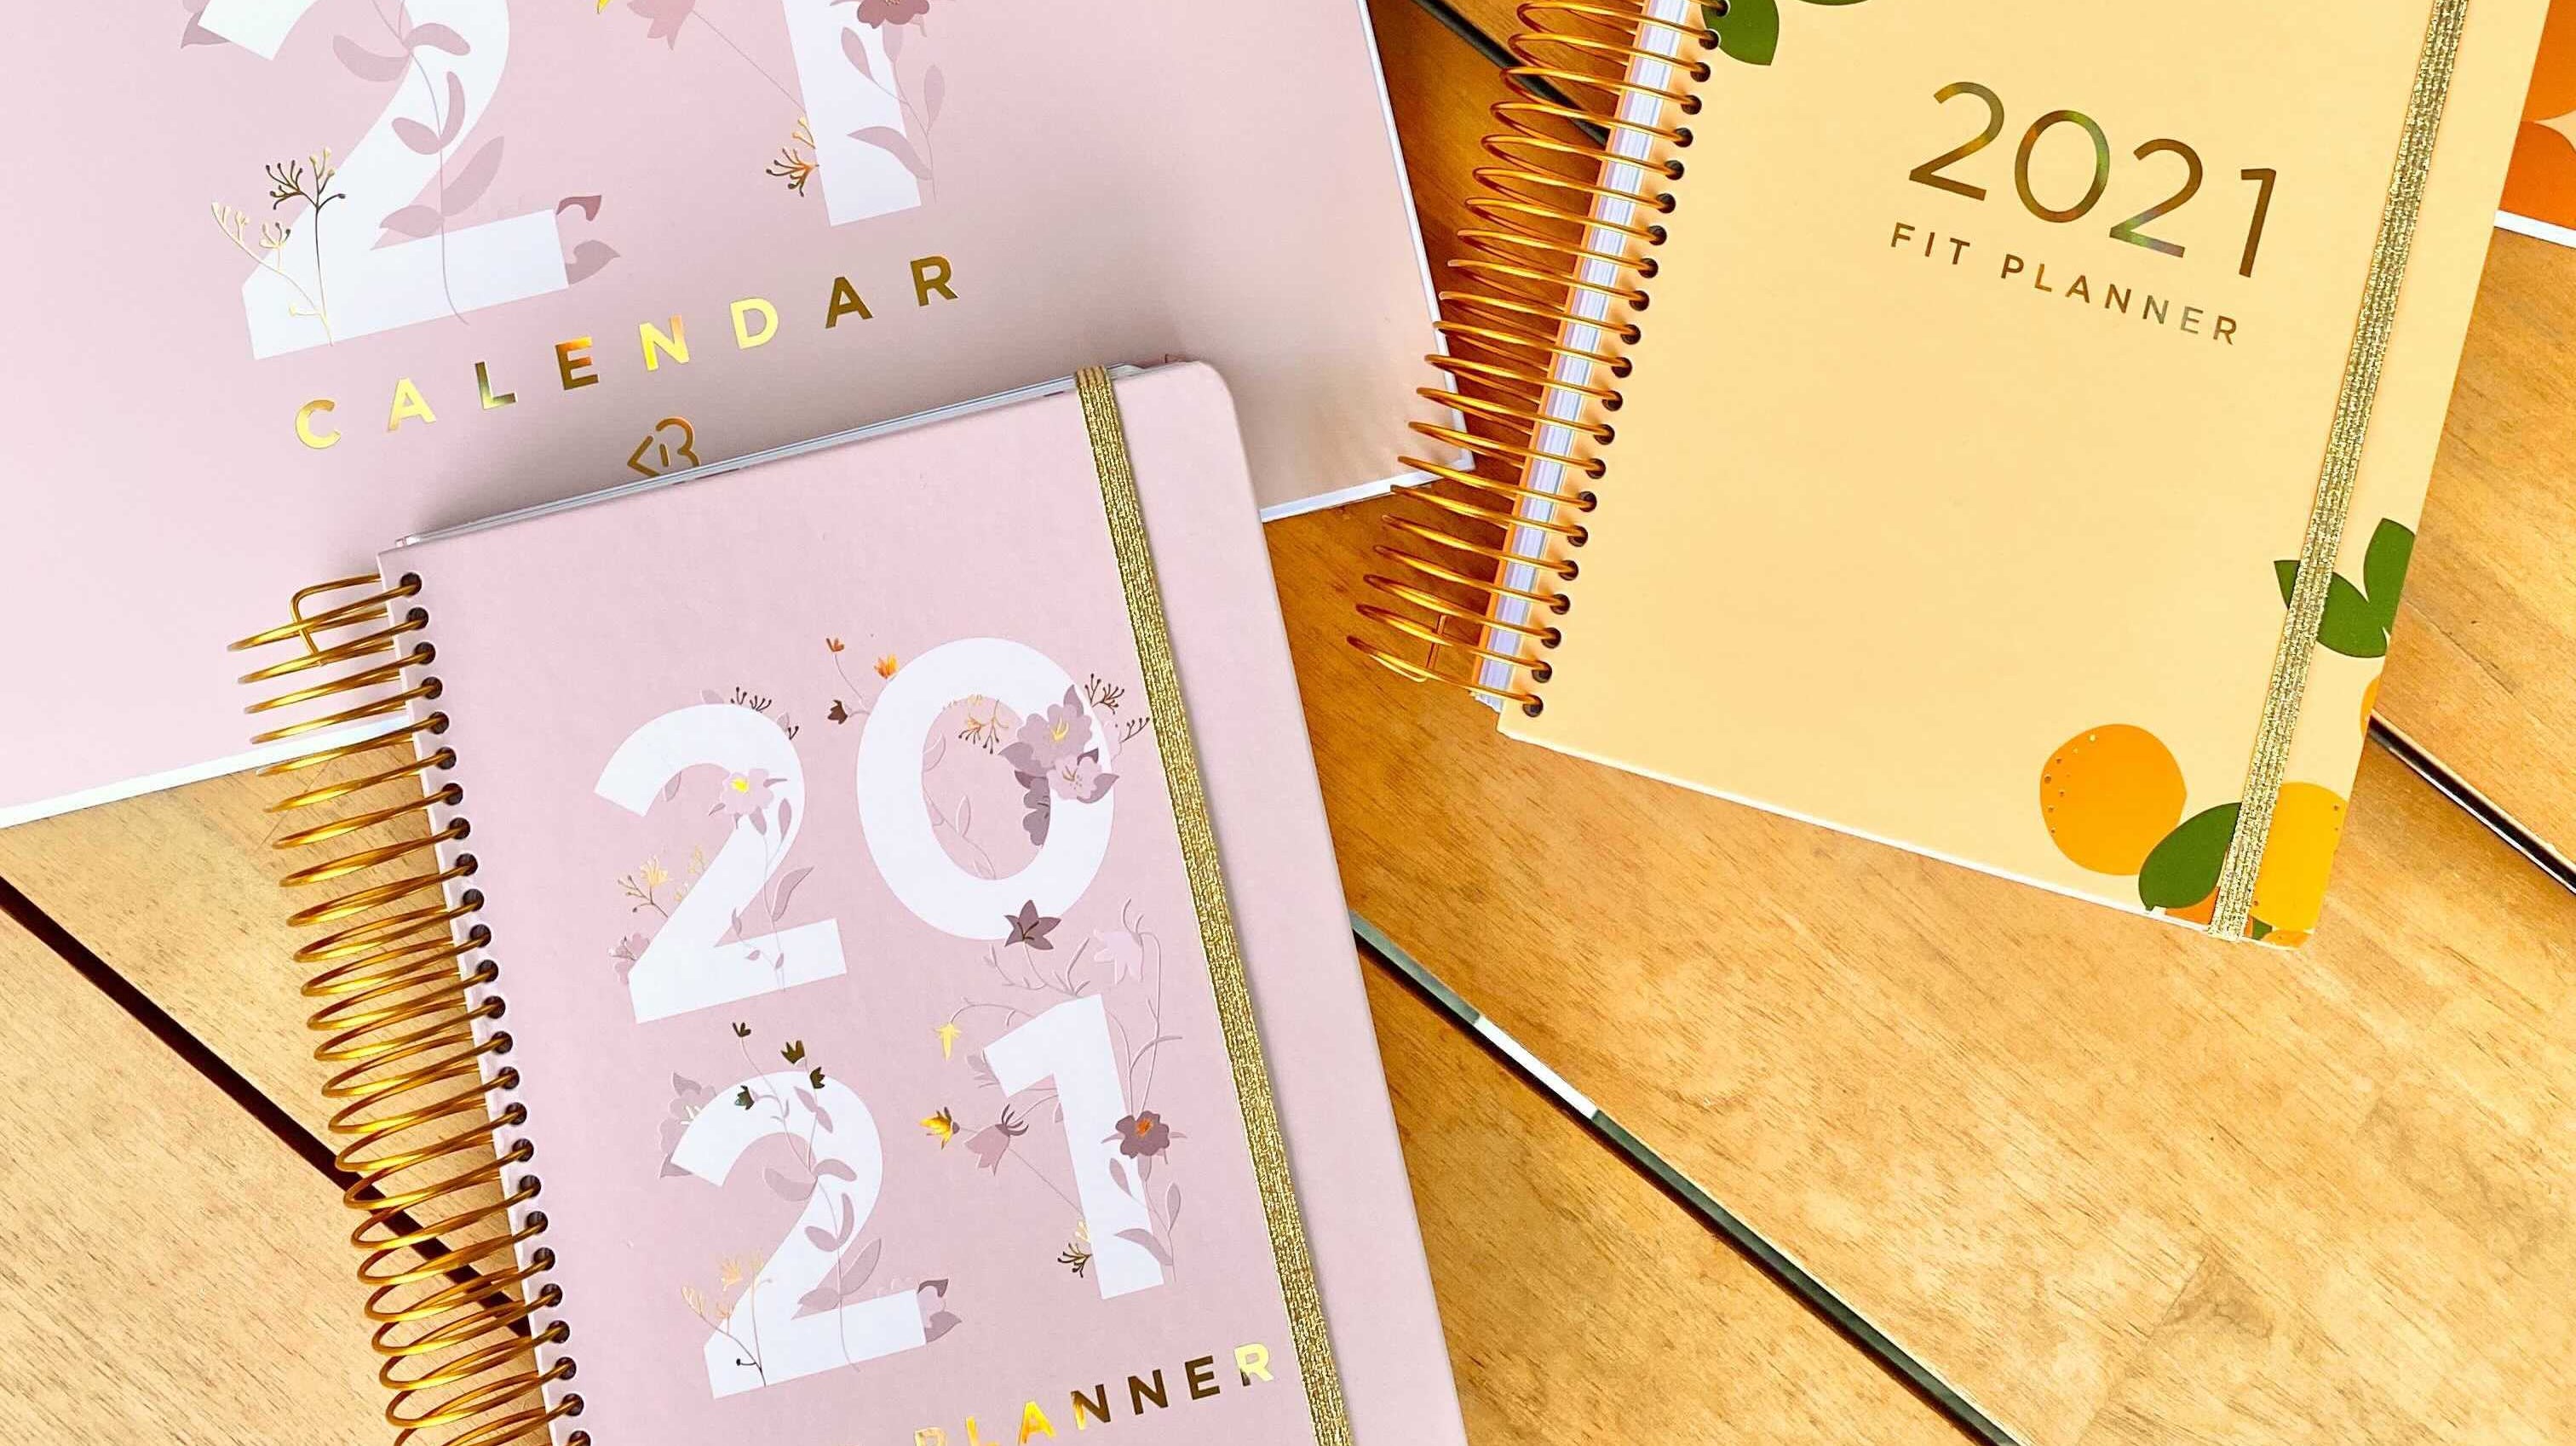 Crush Your Goals in 2021 With the New Fit Planner